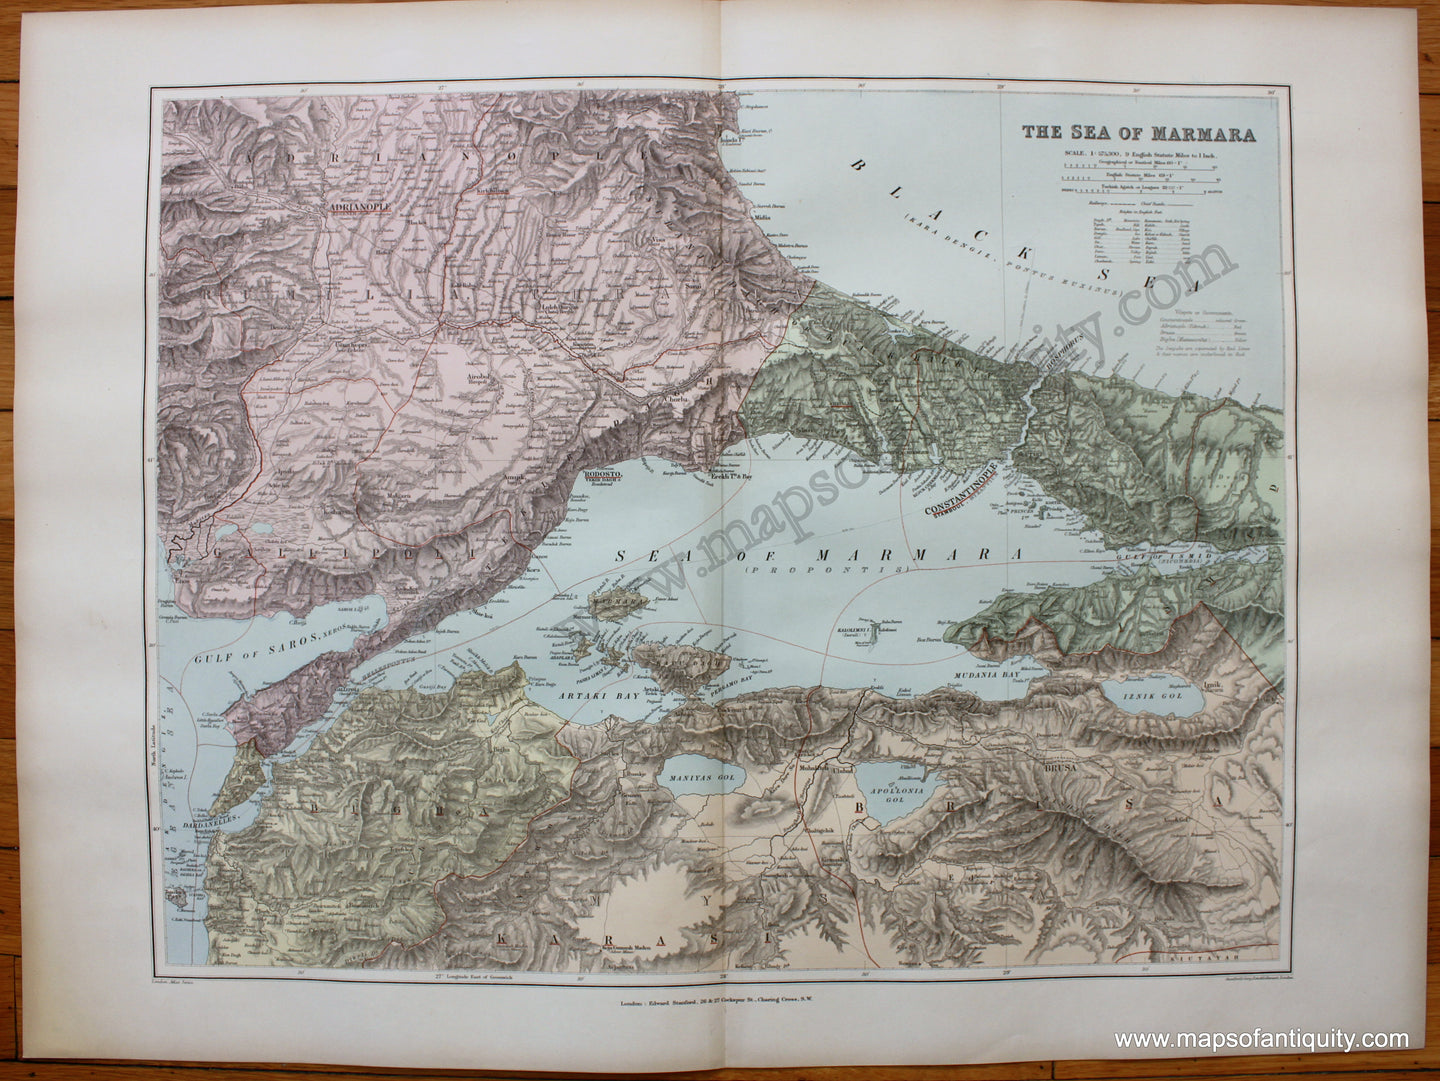 Printed-Color-Antique-Map-The-Sea-of-Marmara-1904-Stanford-1800s-19th-century-Maps-of-Antiquity